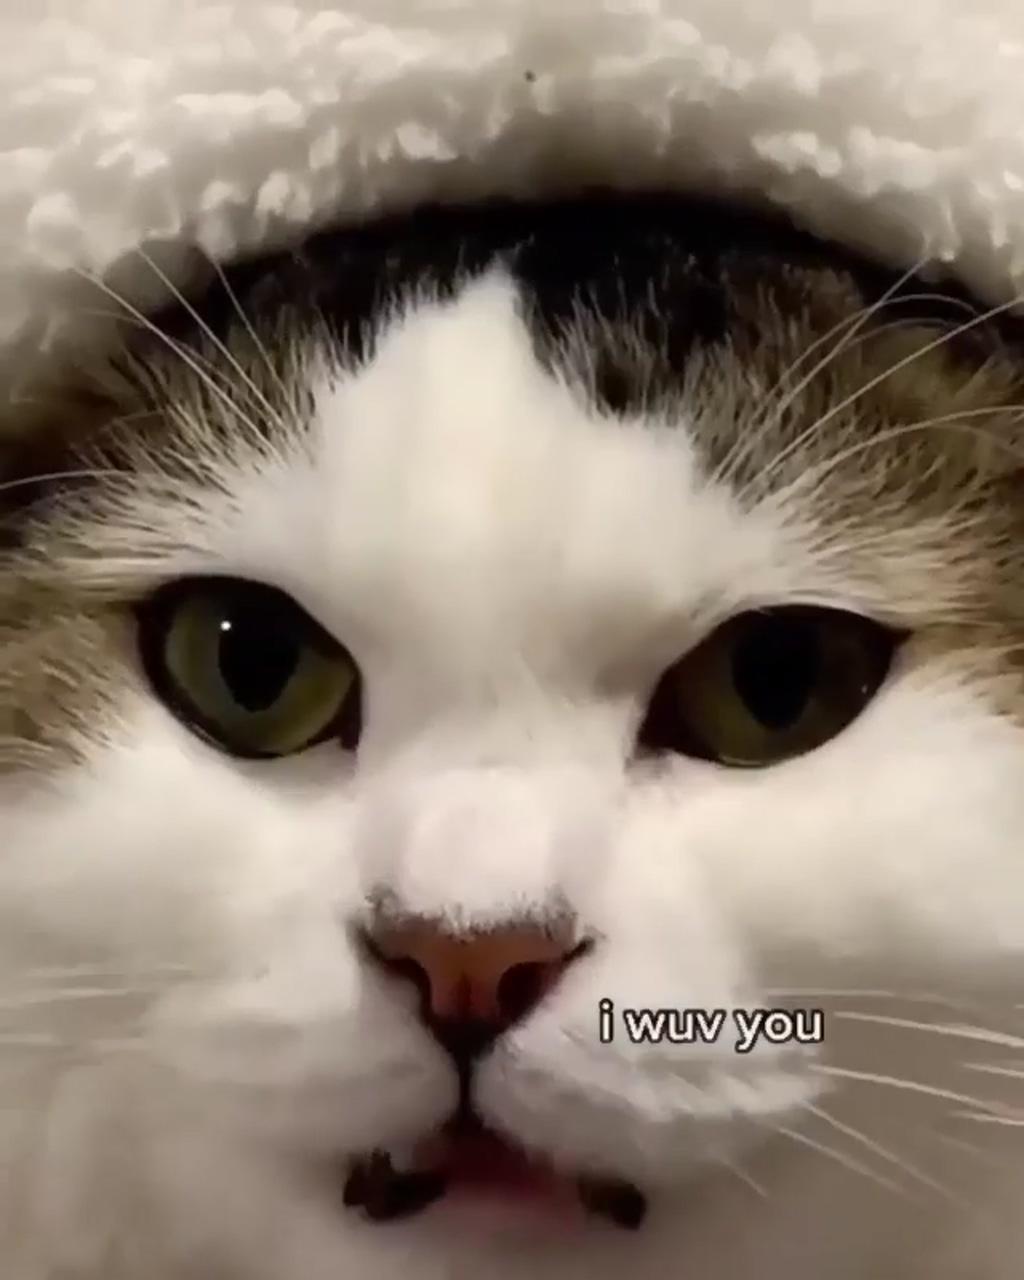 This cat has a message for you; aesthetic pictures